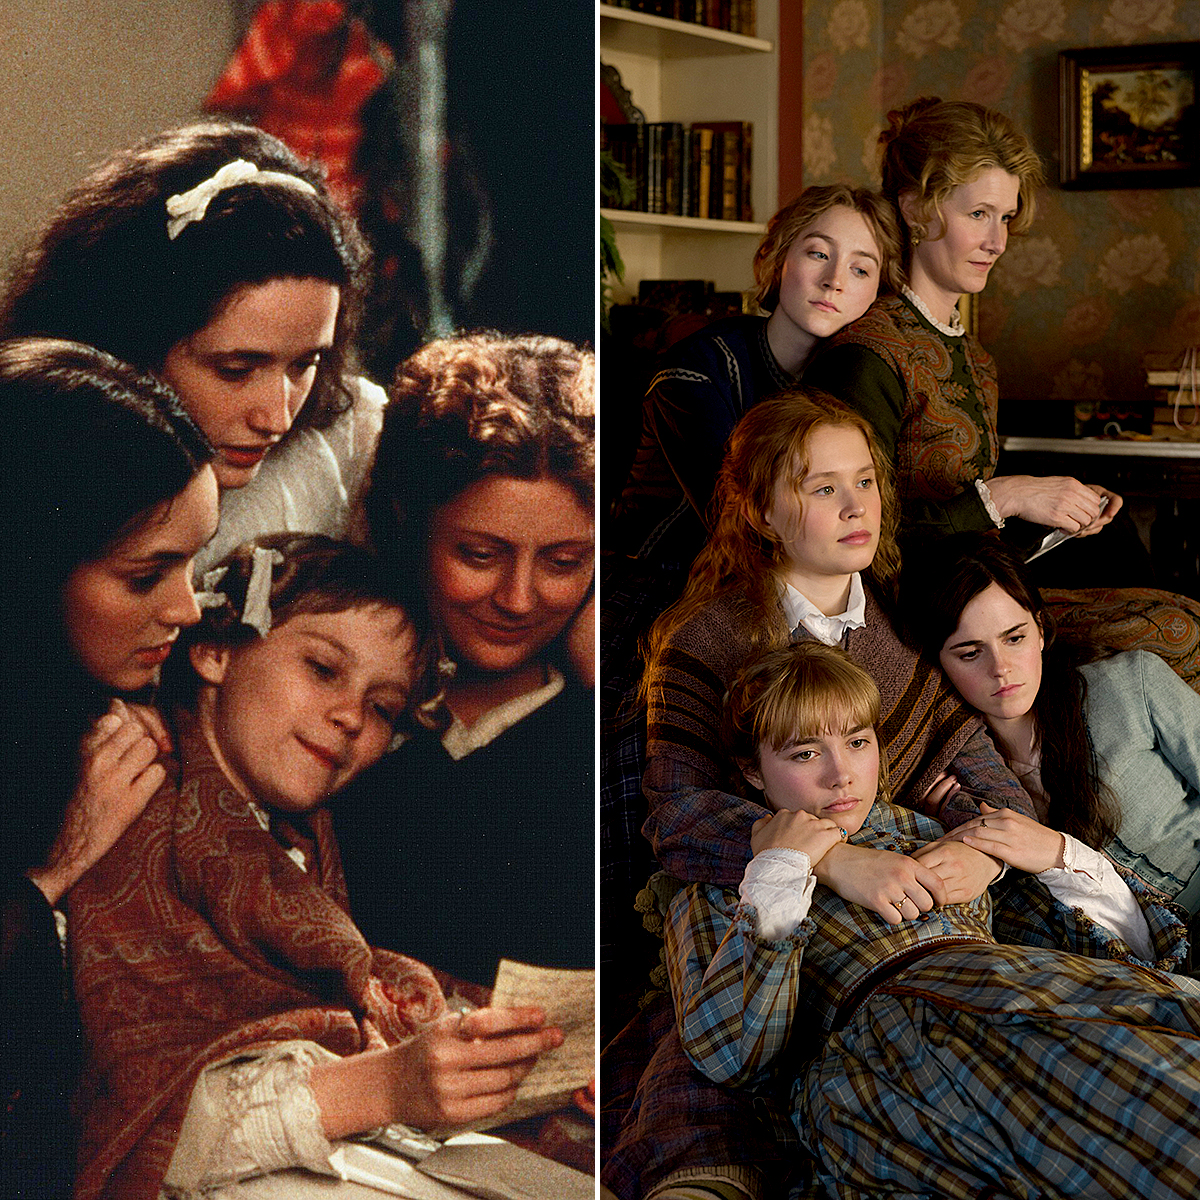 Little Women': See Photos of the 1994 vs 2019 Casts